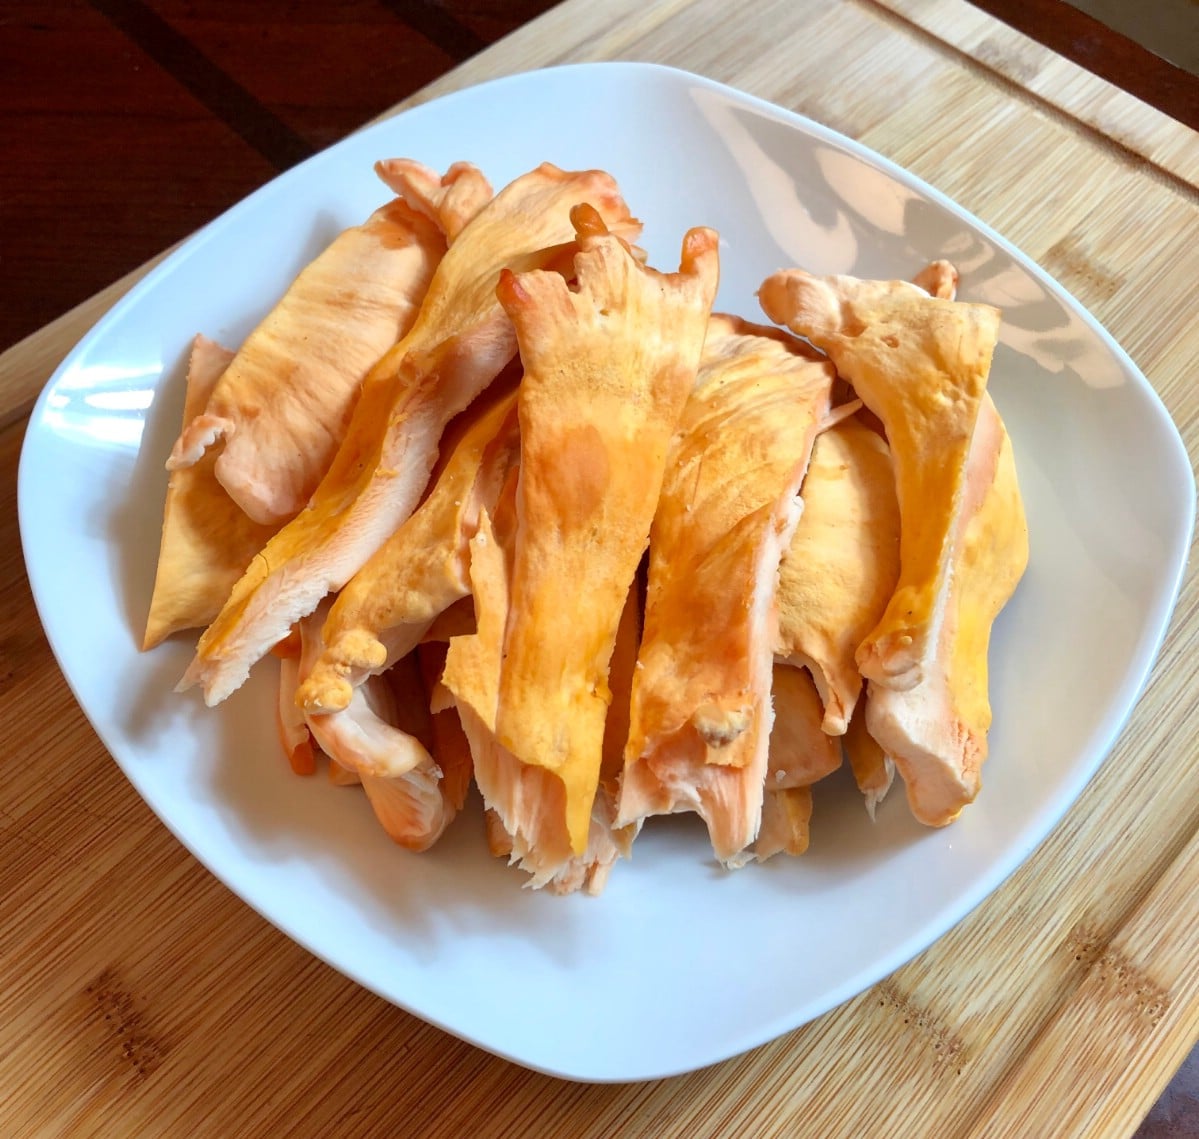 Chcicken of the woods prepared beore using it in a recipe.